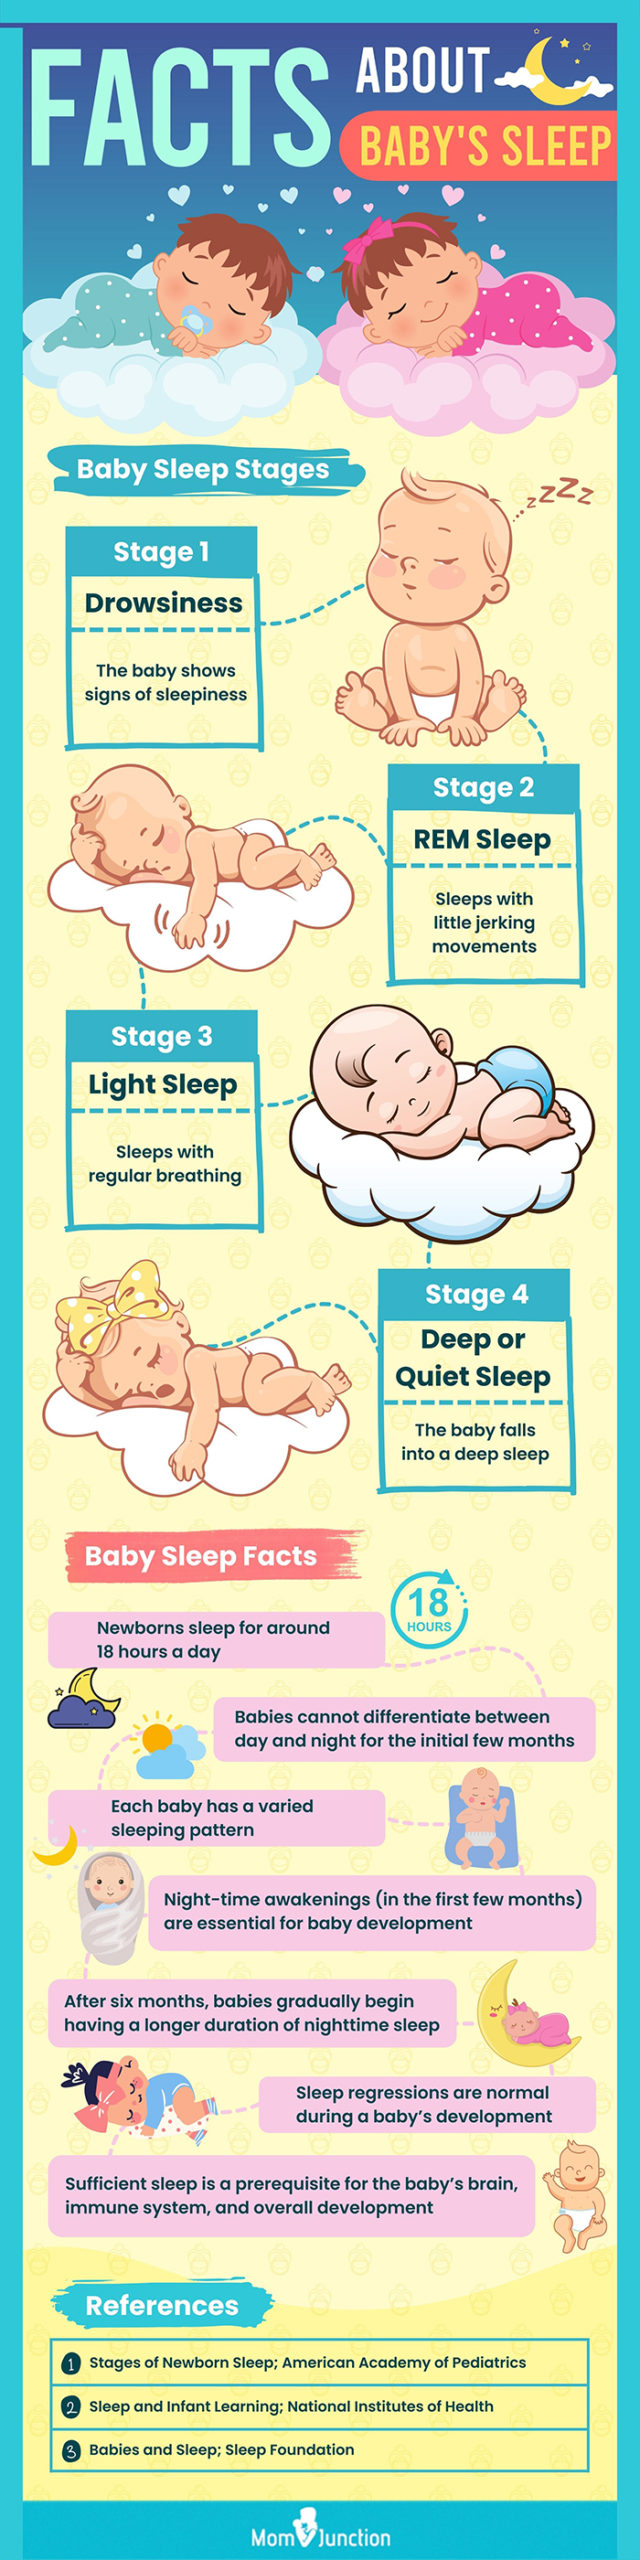 facts about babys sleep (infographic)